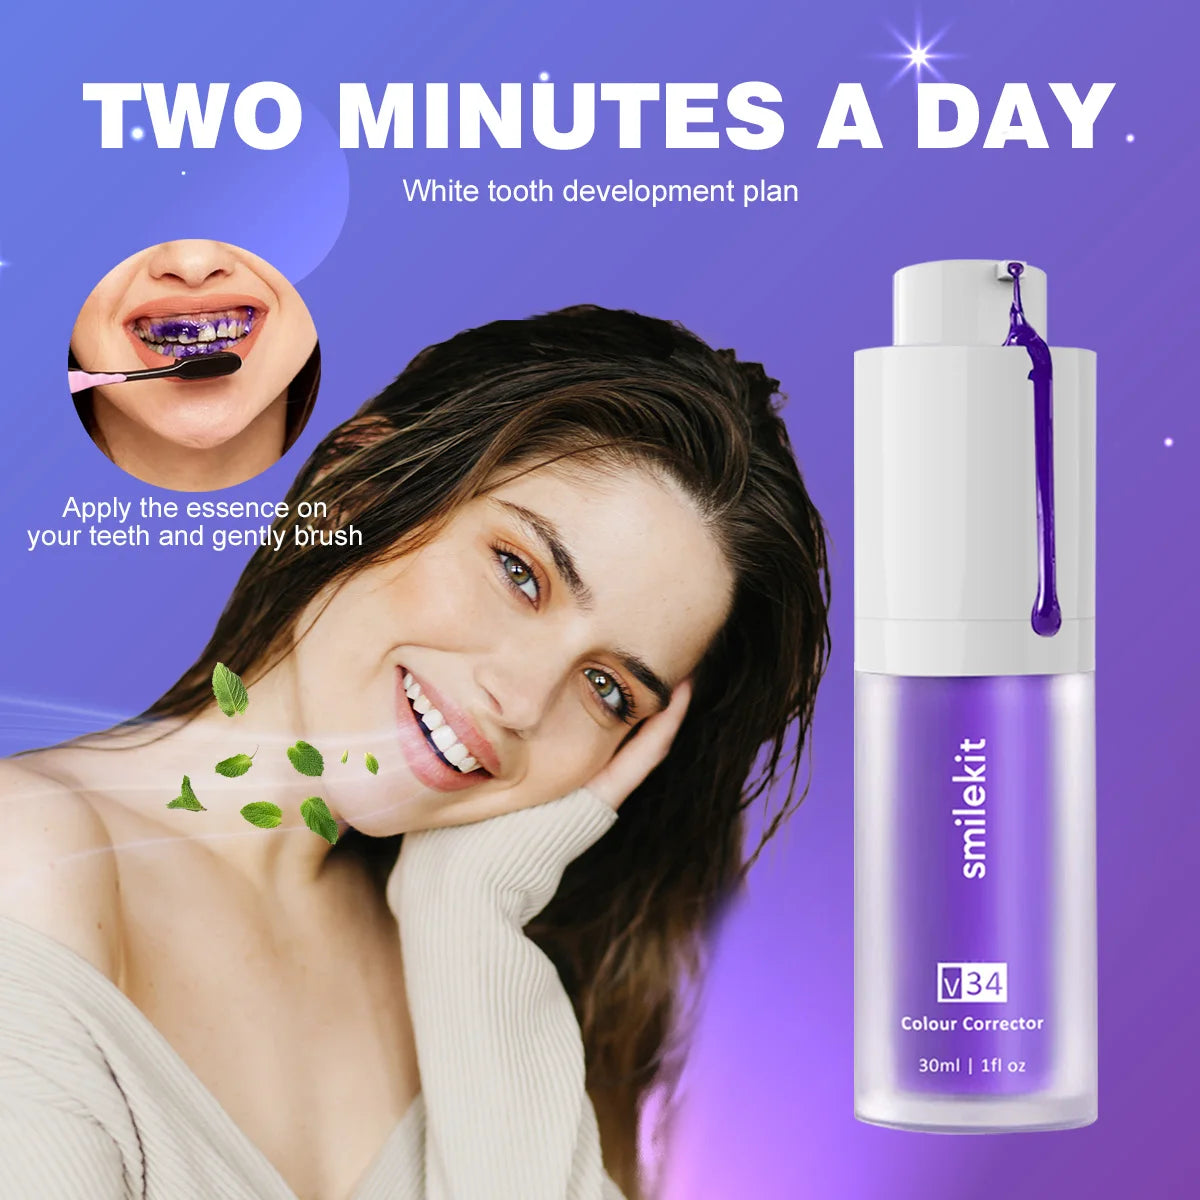 Teeth Whitening Purple Toothpaste Smile Kit: Reduce Yellowing and Brighten Your Oral Care Routine